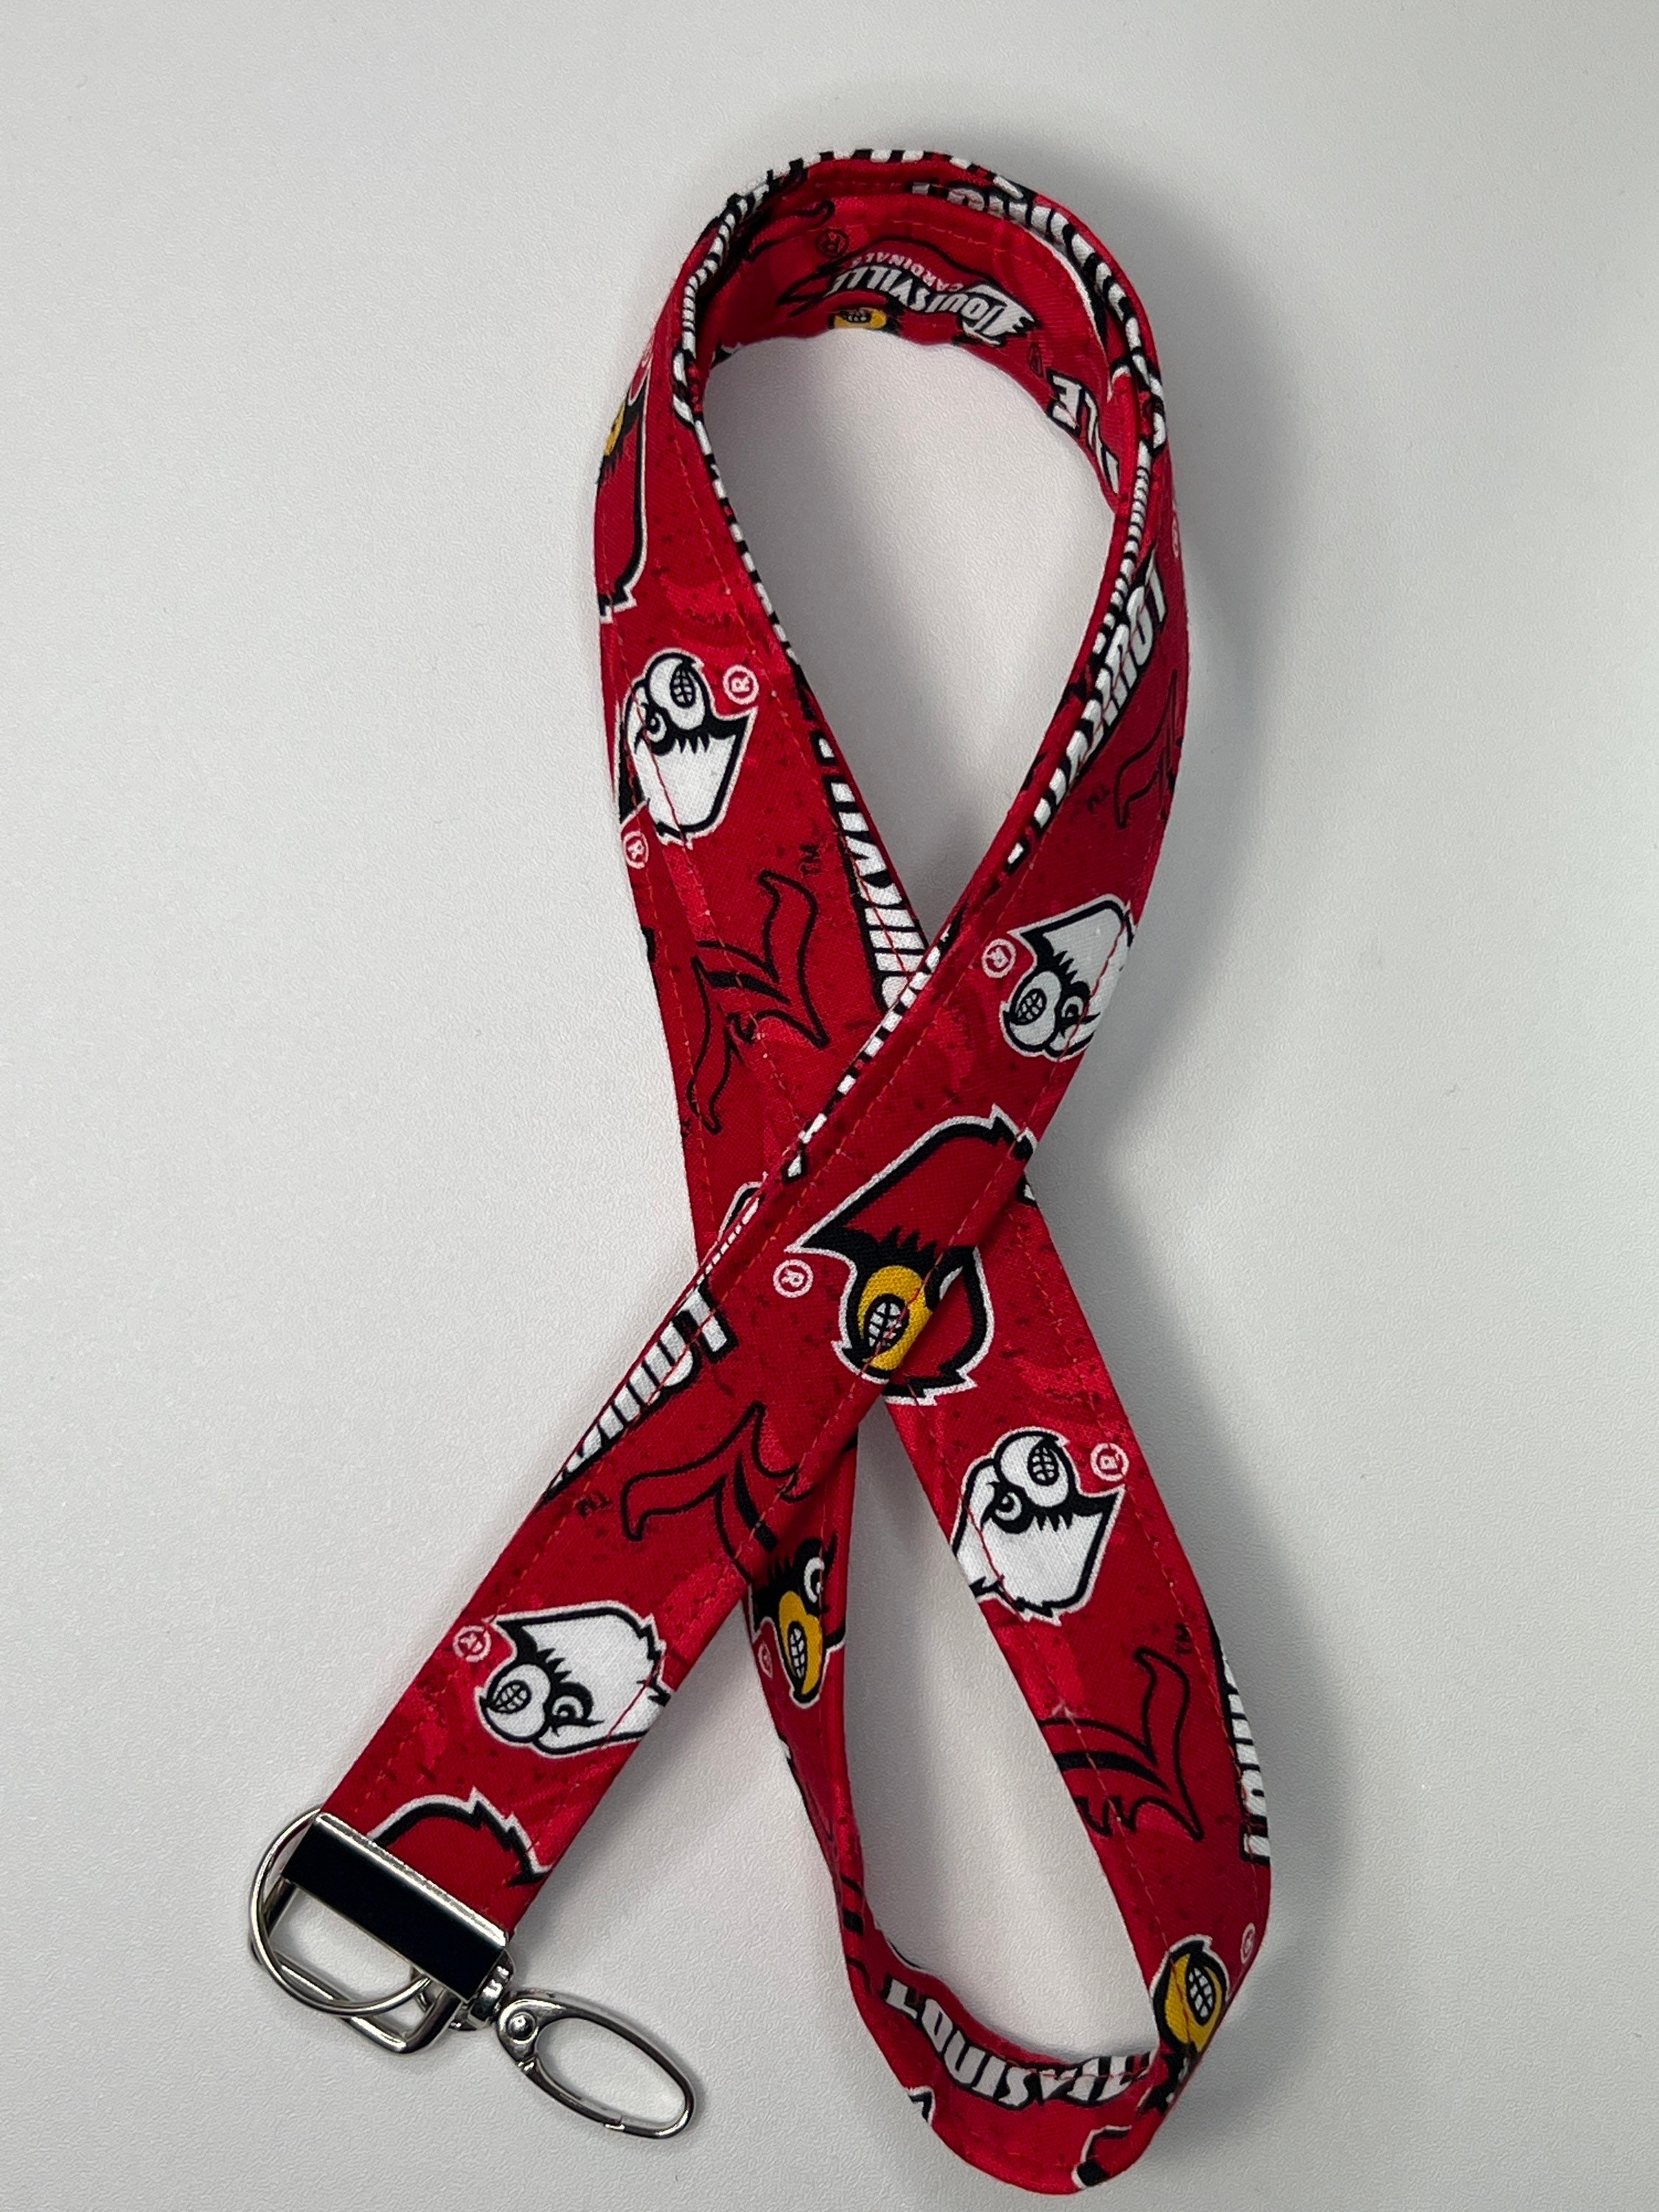 Louisville College Lanyard With Swivel Clip 